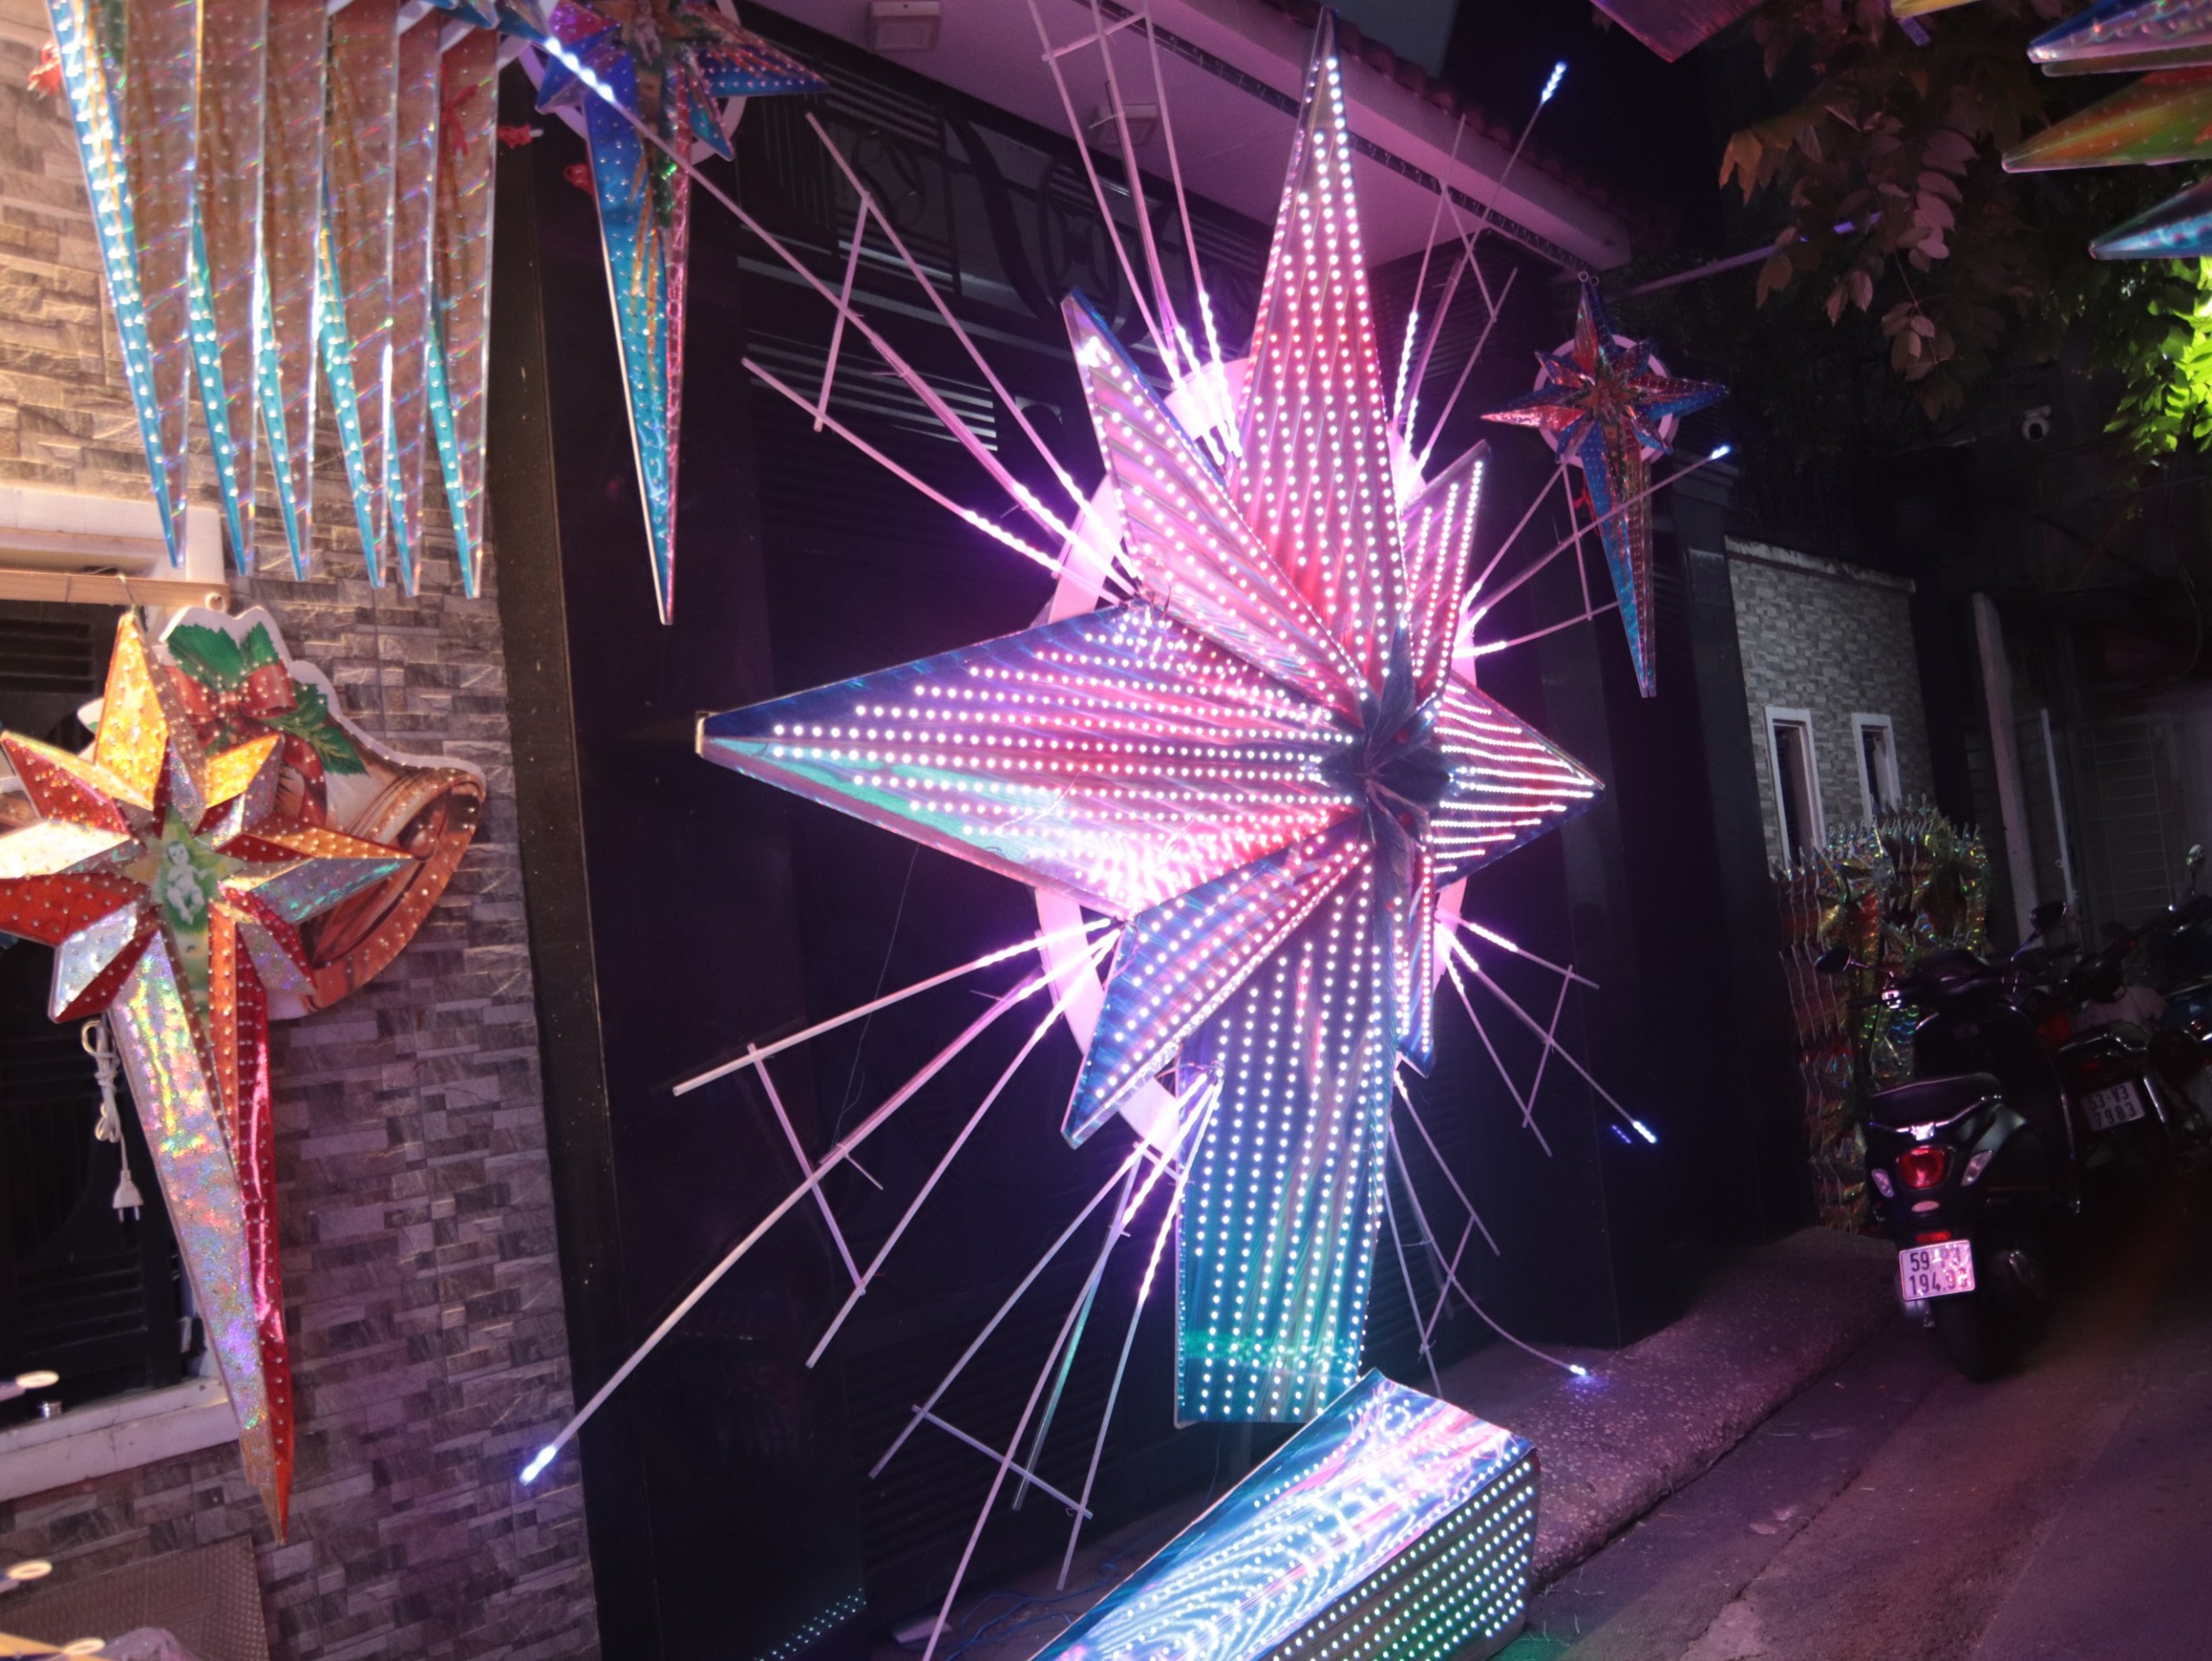 An 8-meter Christmas star fetches up to VND50 million ($2,060.07). This type of design is usually used by churches, restaurants, and bookstores. Photo: Minh Chau / Tuoi Tre News